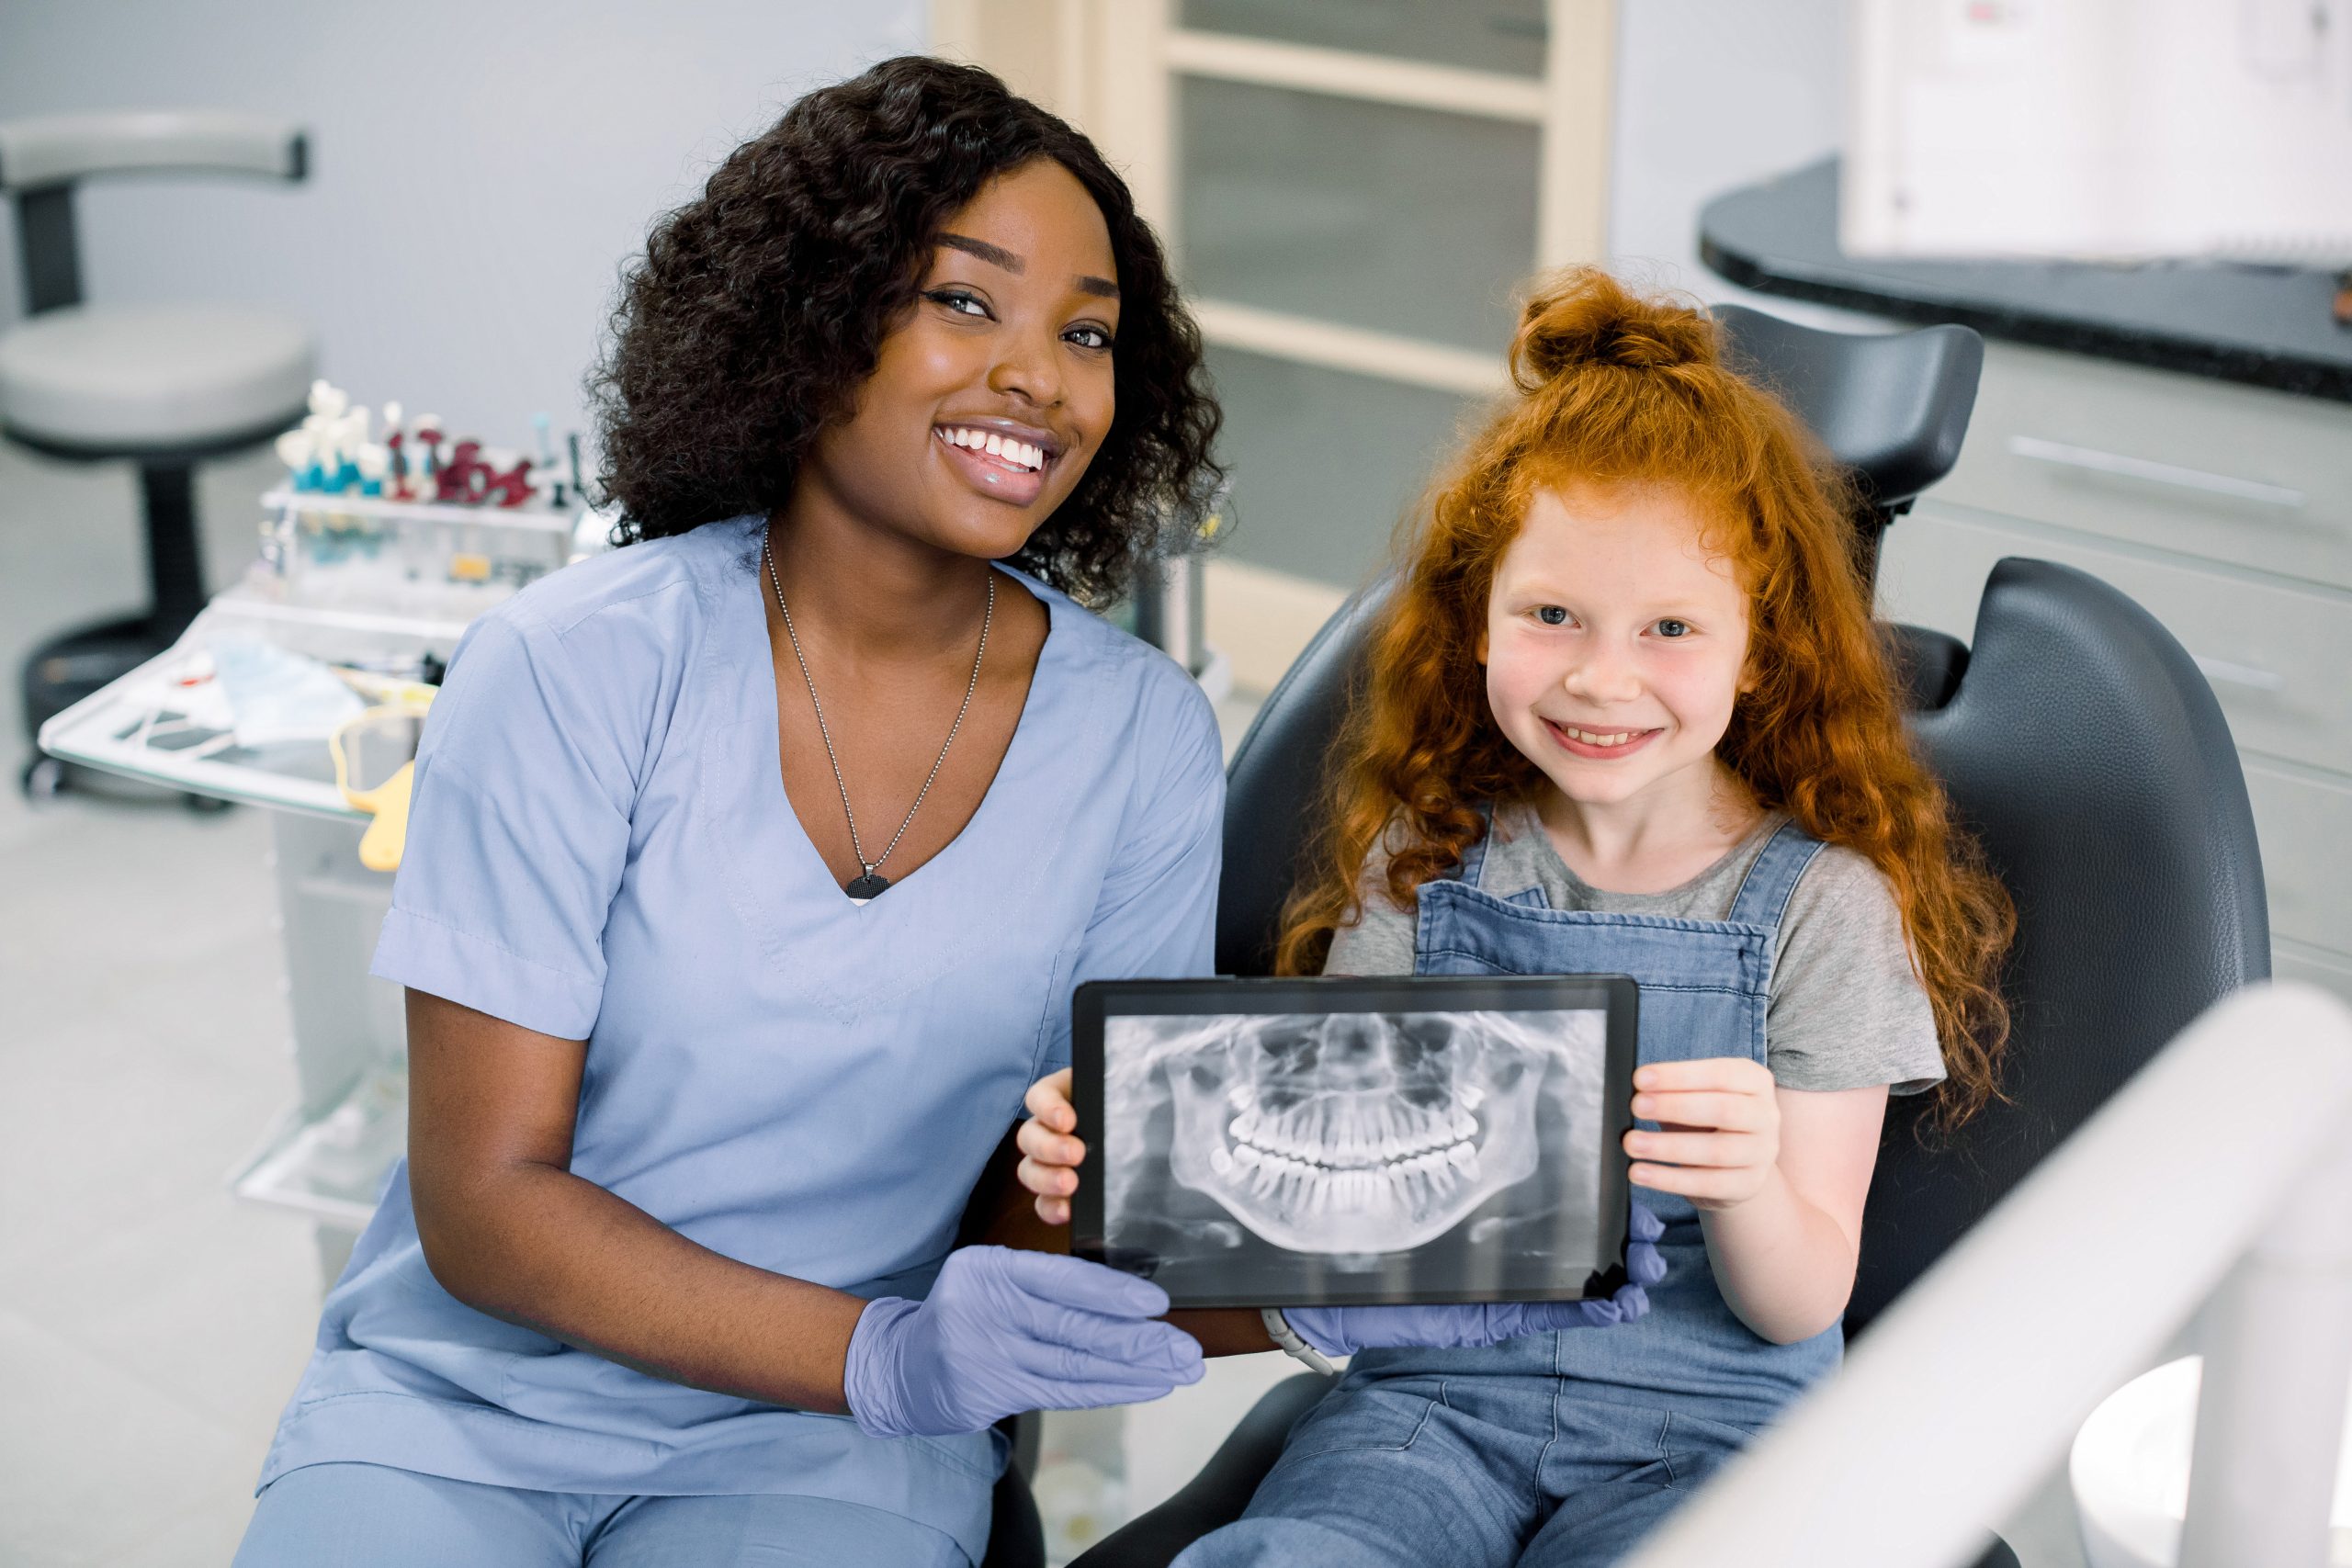 Little smiling girl with red curly hair sitting on chair and looking at camera, while holding x-ray scan image of her teeth on digital tablet together with her cheerful black female dentist at clinic.